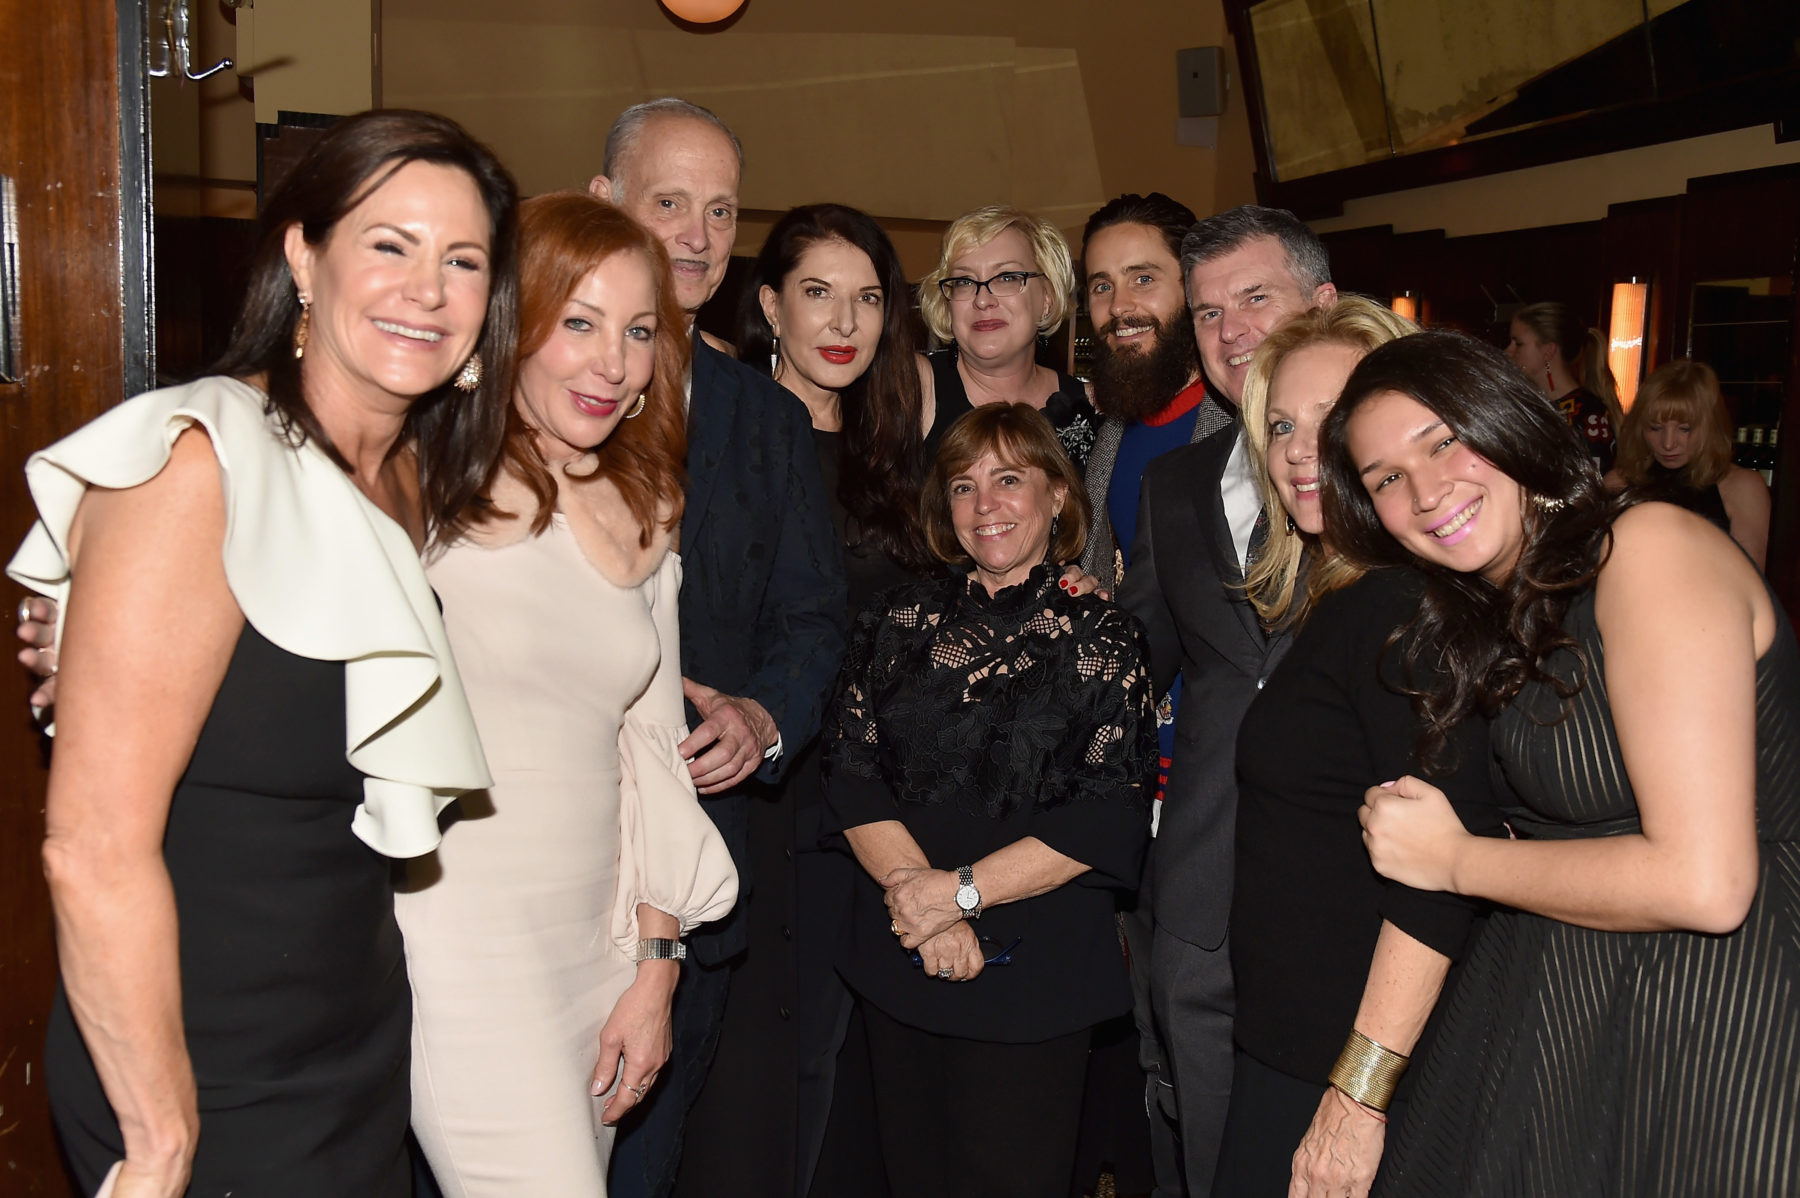 Board and staff members pose with John Waters, Marina Abramovic, Jared Leto, and friends at the 2018 New York City dinner fundraiser.